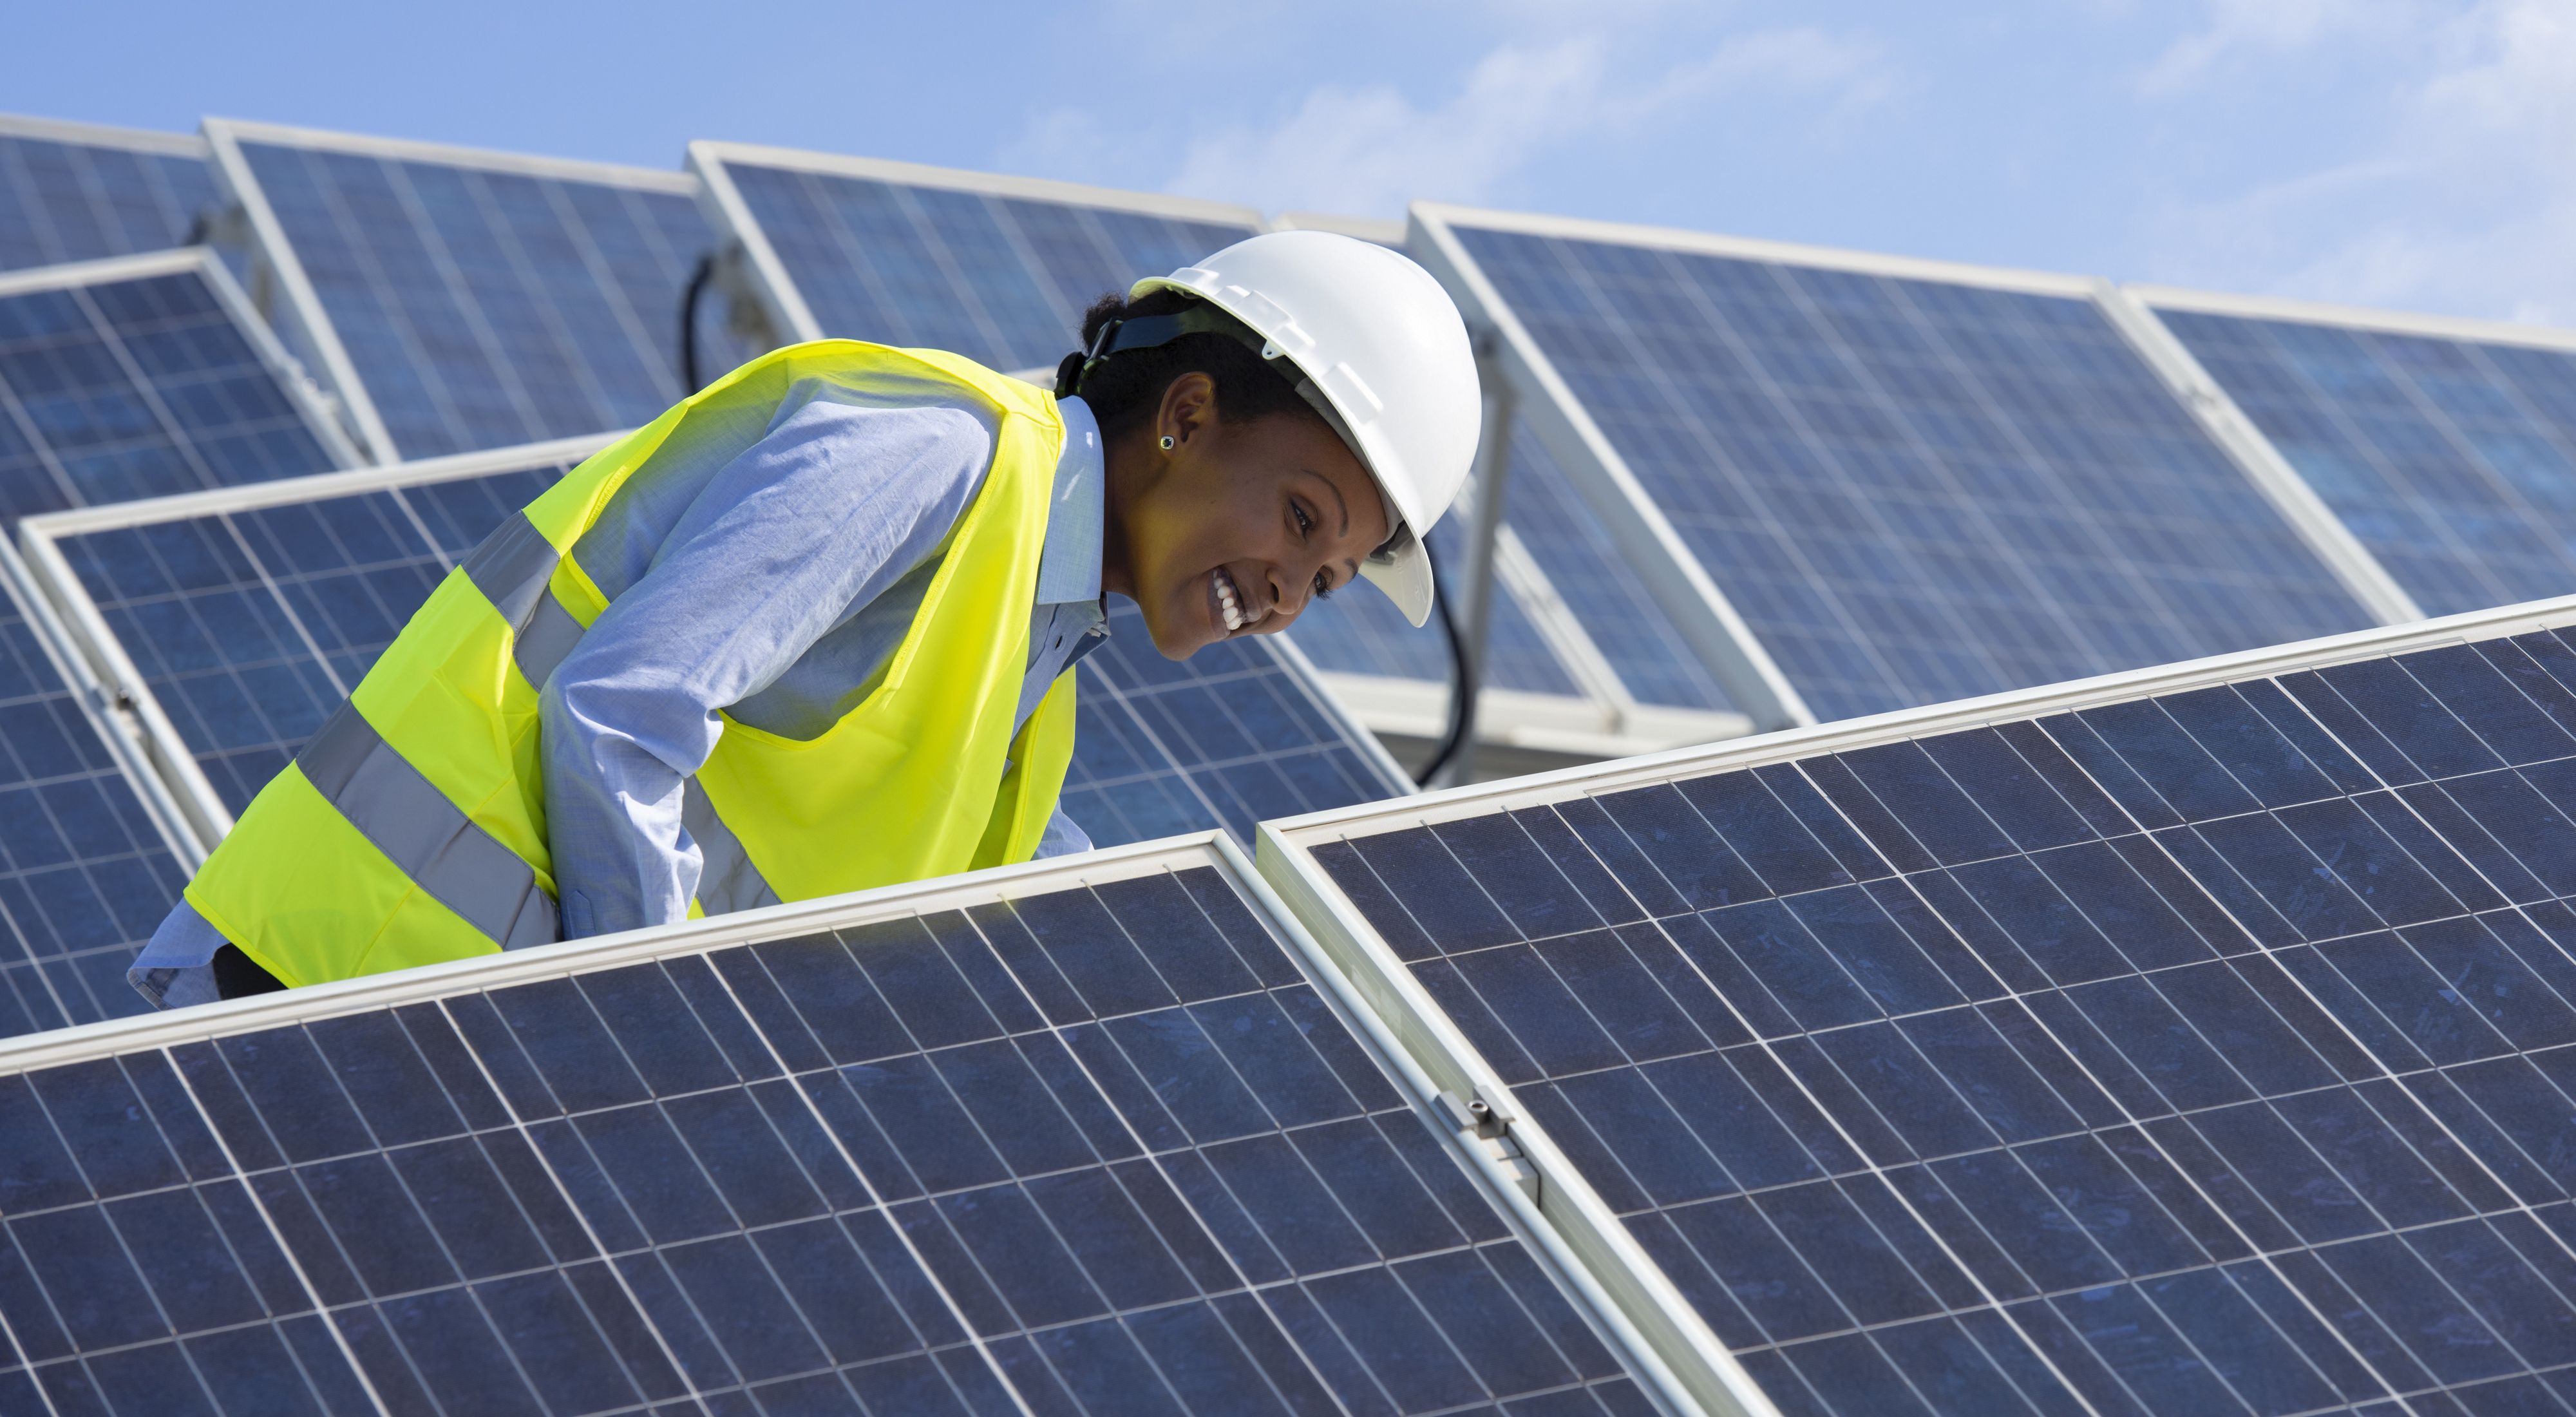 Electrical engineer woman checking solar photovoltaic panels on the roof of a solar farm. 